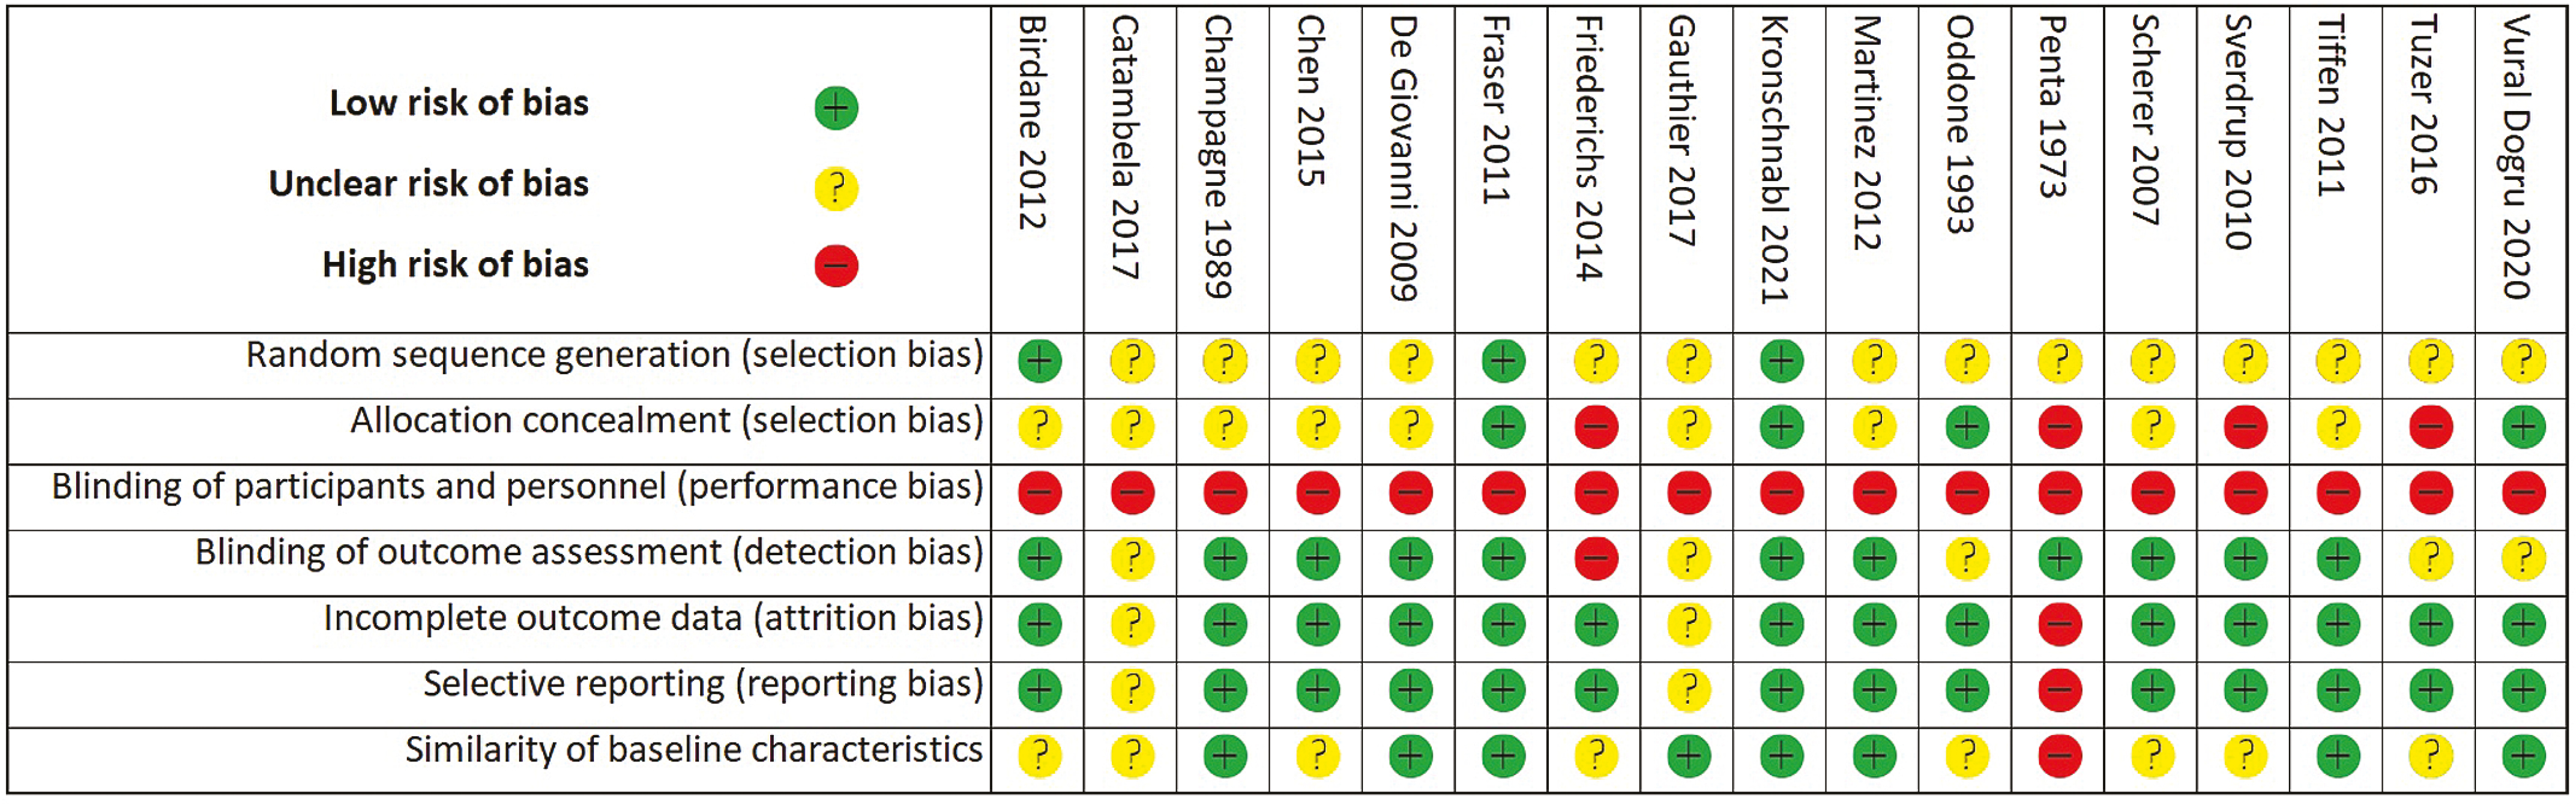 Risk of bias tables for all included studies.